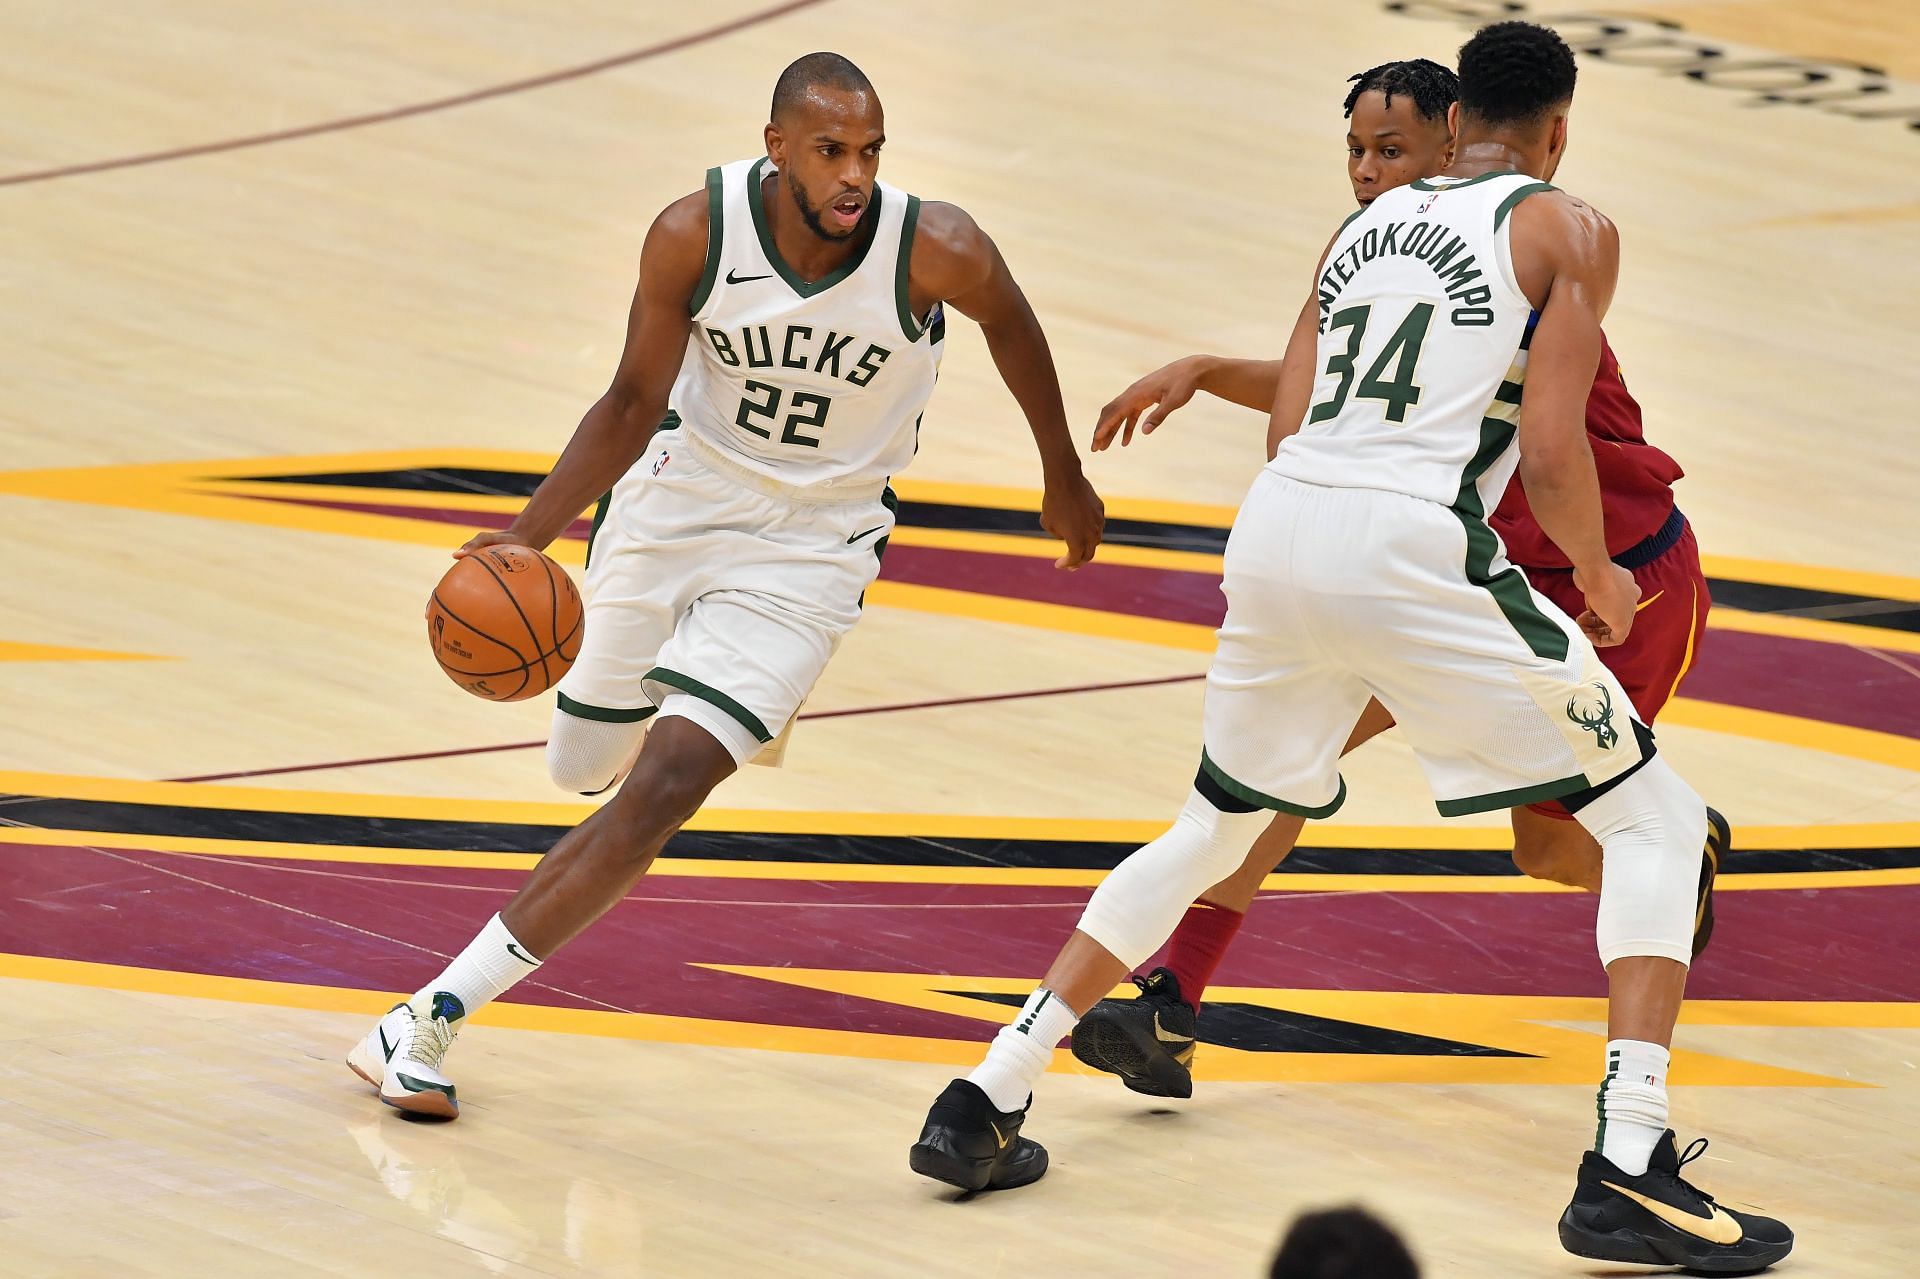 Khris Middleton #22 of the Milwaukee Bucks drives the ball against Isaac Okoro #35 of the Cleveland Cavaliers and teammate Giannis Antetokounmpo #34 in the third quarter at Rocket Mortgage Fieldhouse on February 05, 2021 in Cleveland, Ohio.